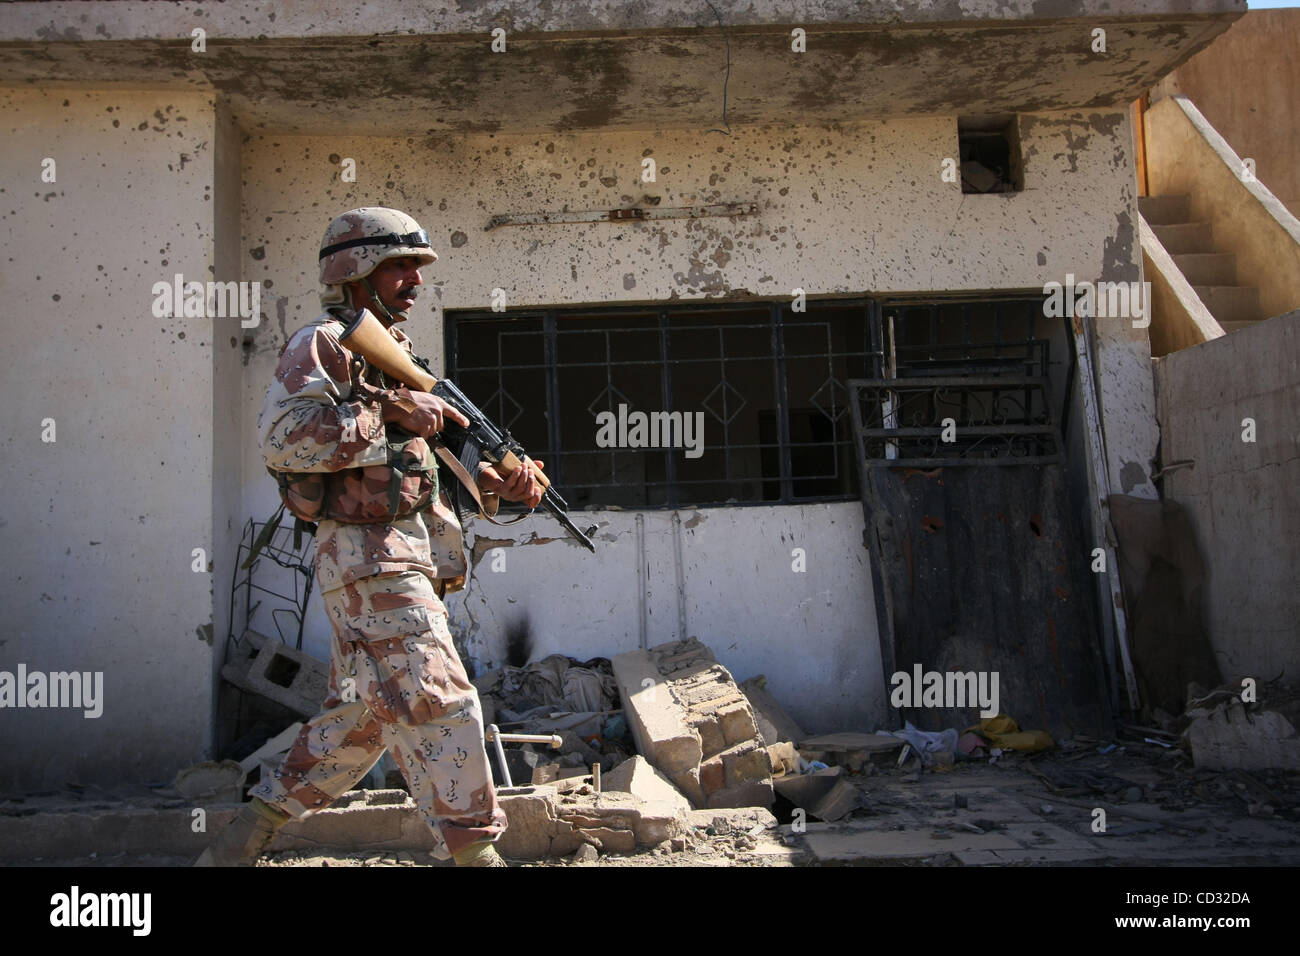 Apr 03, 2008 - Baghdad, Baghdad, Iraq - A soldier of the Iraqi Army passes a burnt out building while on a joint patrol with US Forces in the al Dora district of Baghdad. (Credit Image: © Simon Klingert/ZUMA Press) Stock Photo